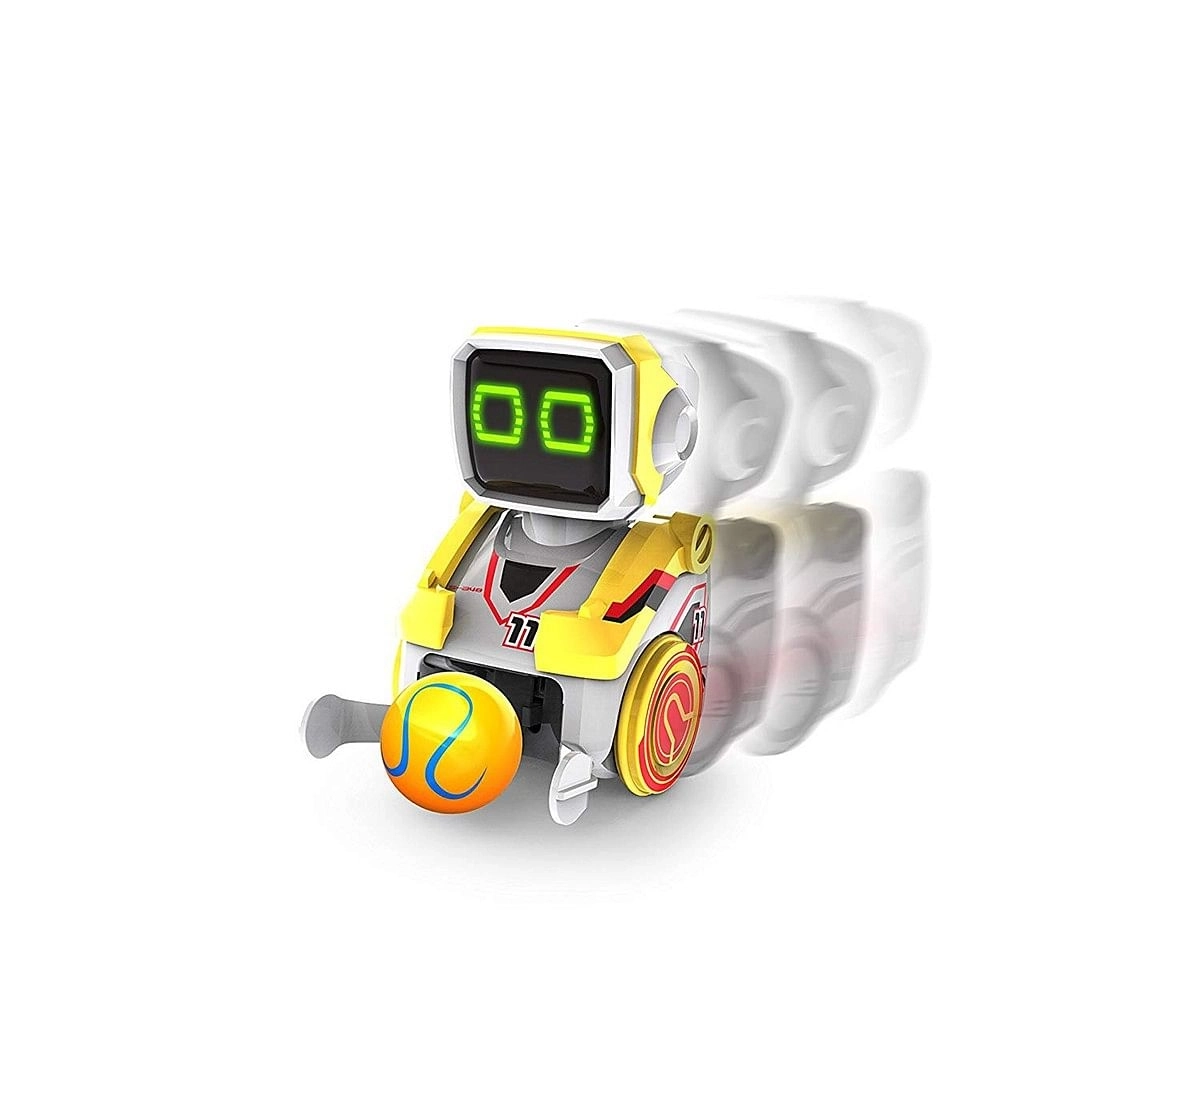 Silverlit Kickabot  3 In 1 Game Edition With Remote Control, Twin Pack Robotics for Kids age 5Y+